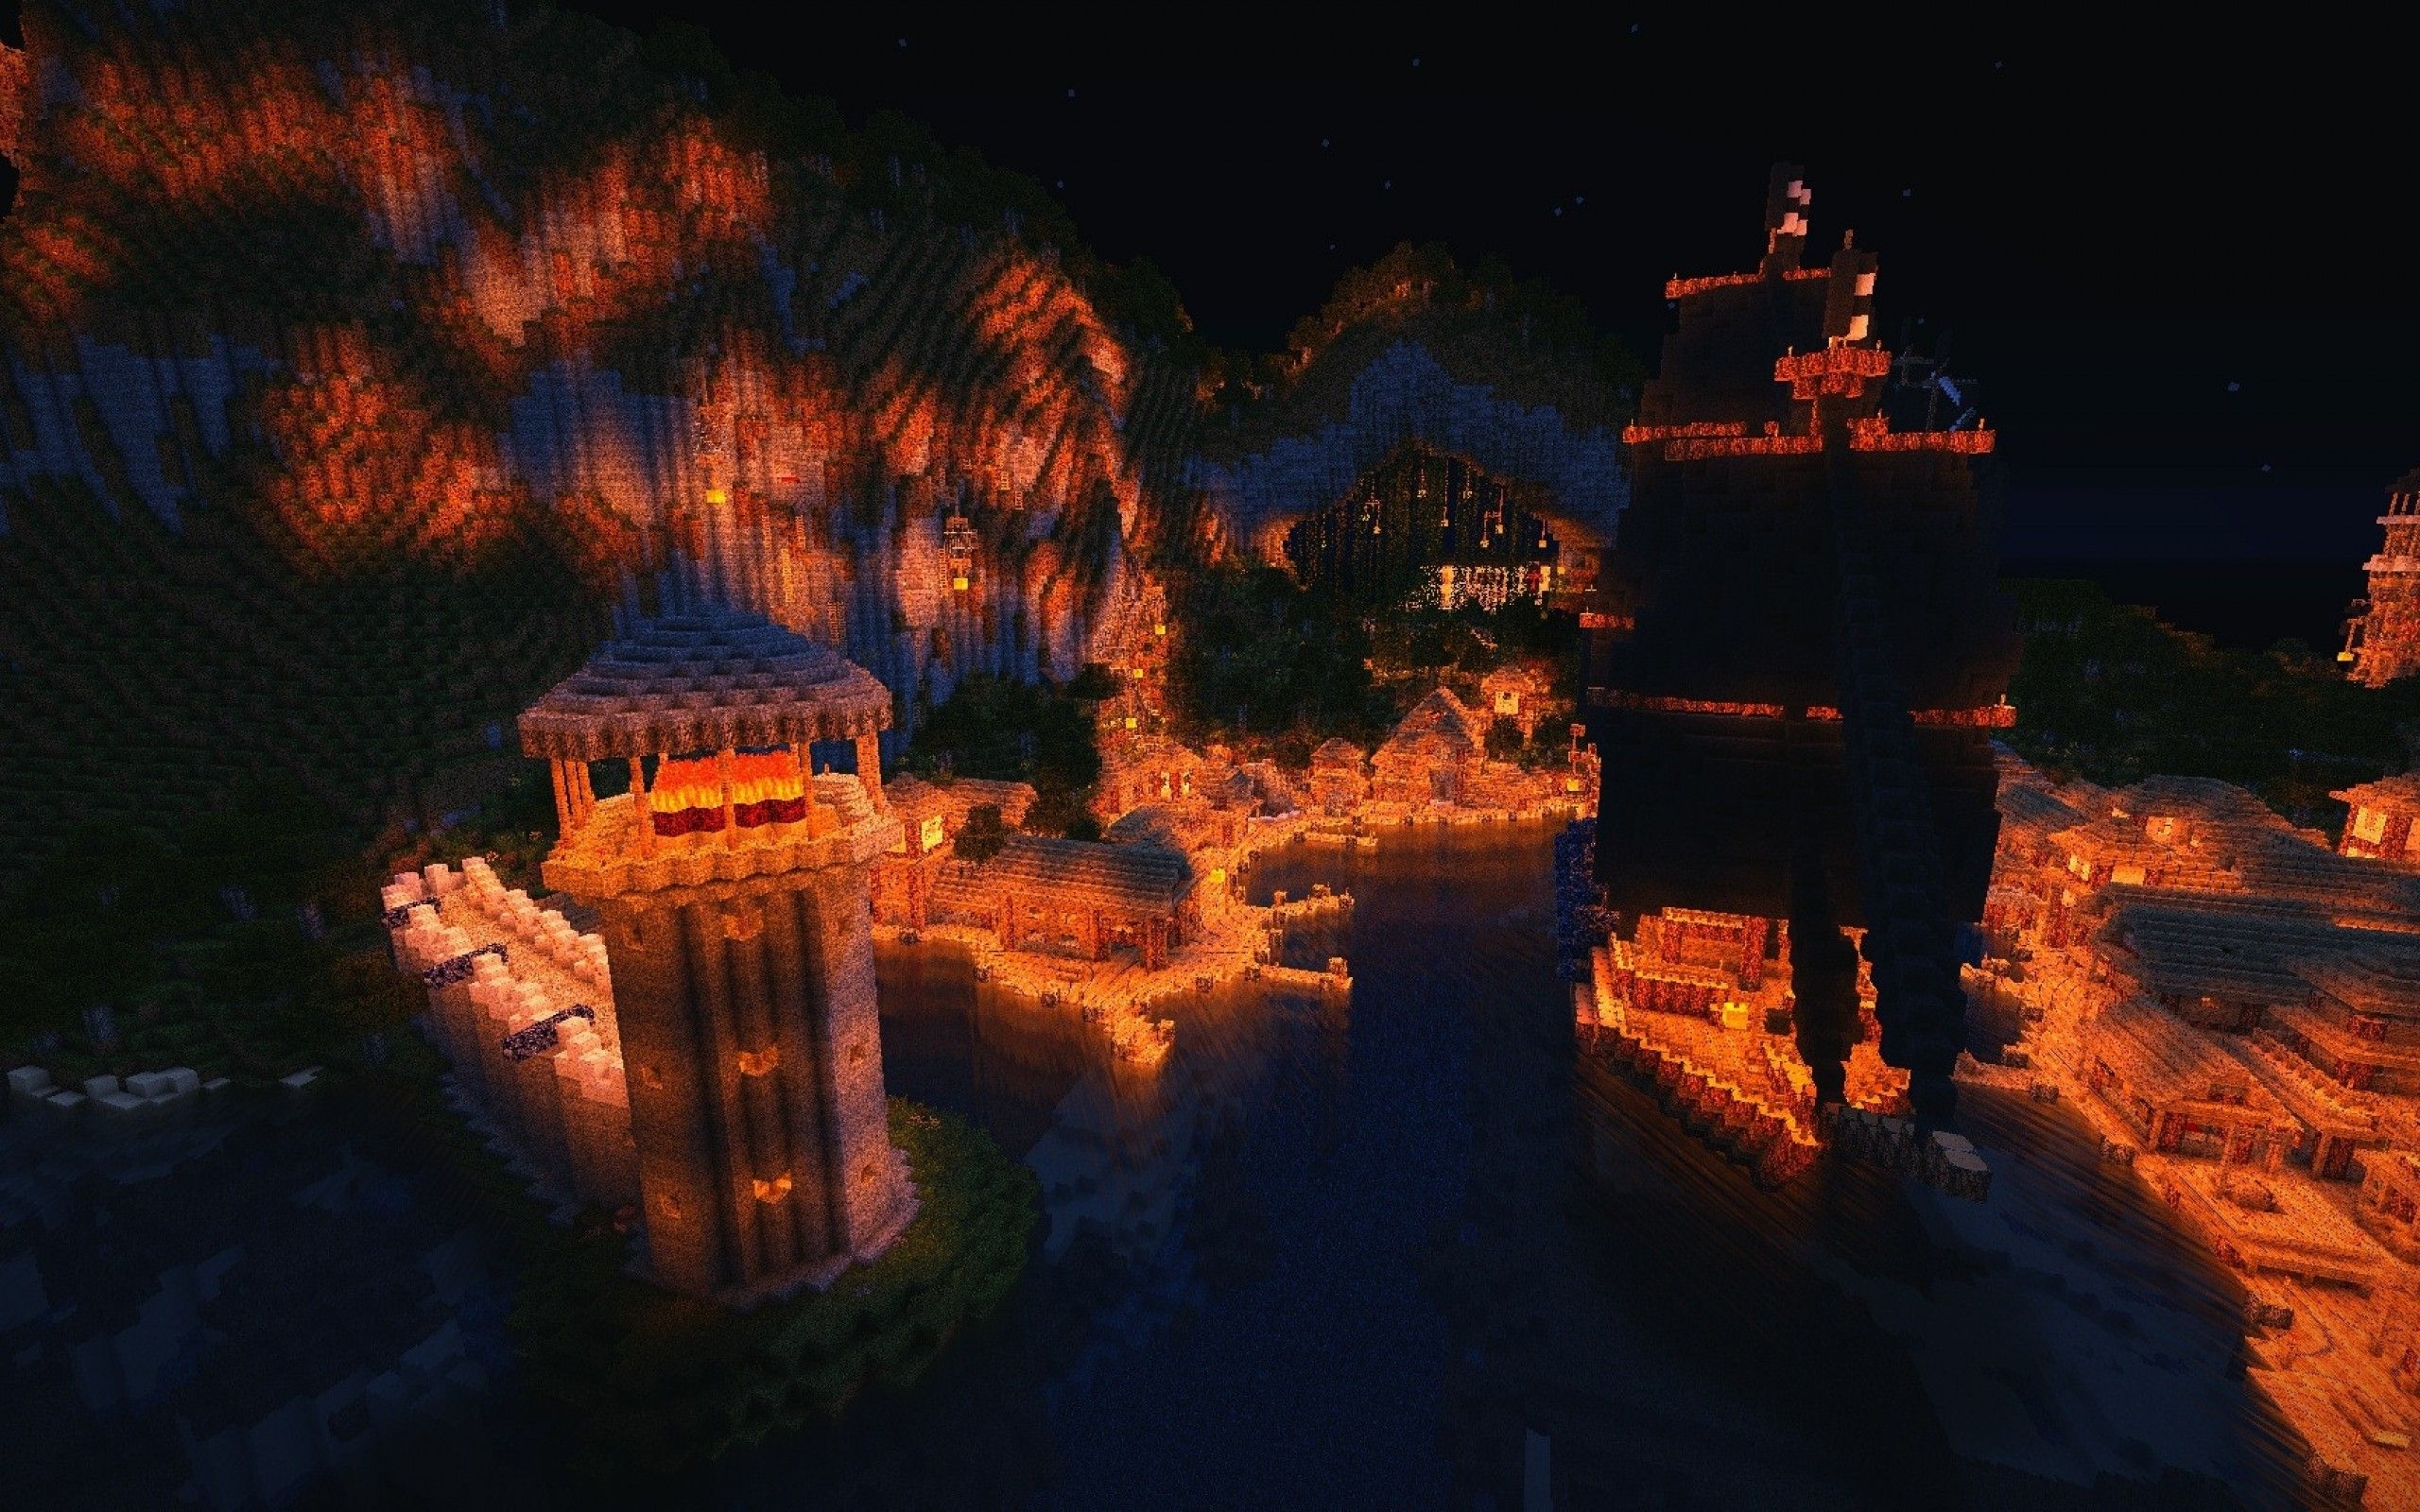 Download 2560x1600 Minecraft, Mod, Towers, Night Wallpaper for MacBook Pro 13 inch